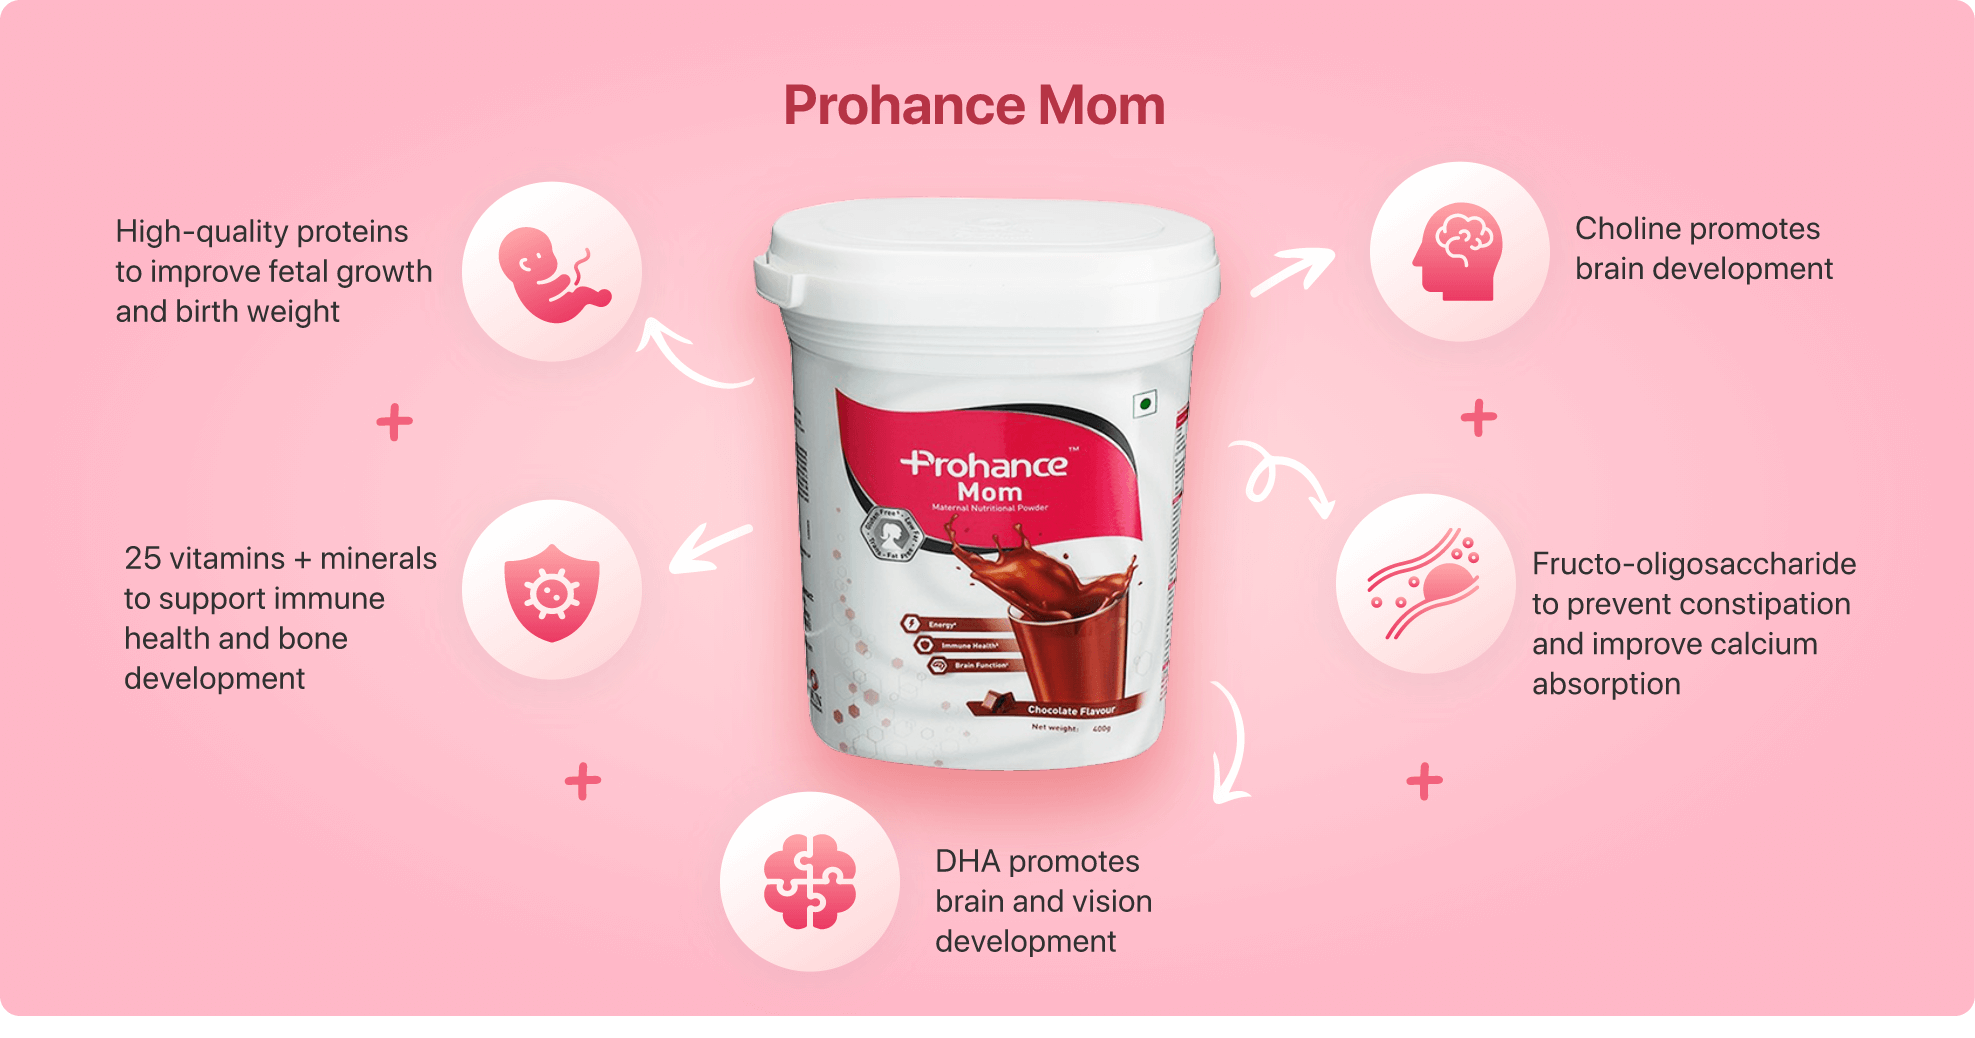 home-ingredients-desk-prohance-Mom-updated